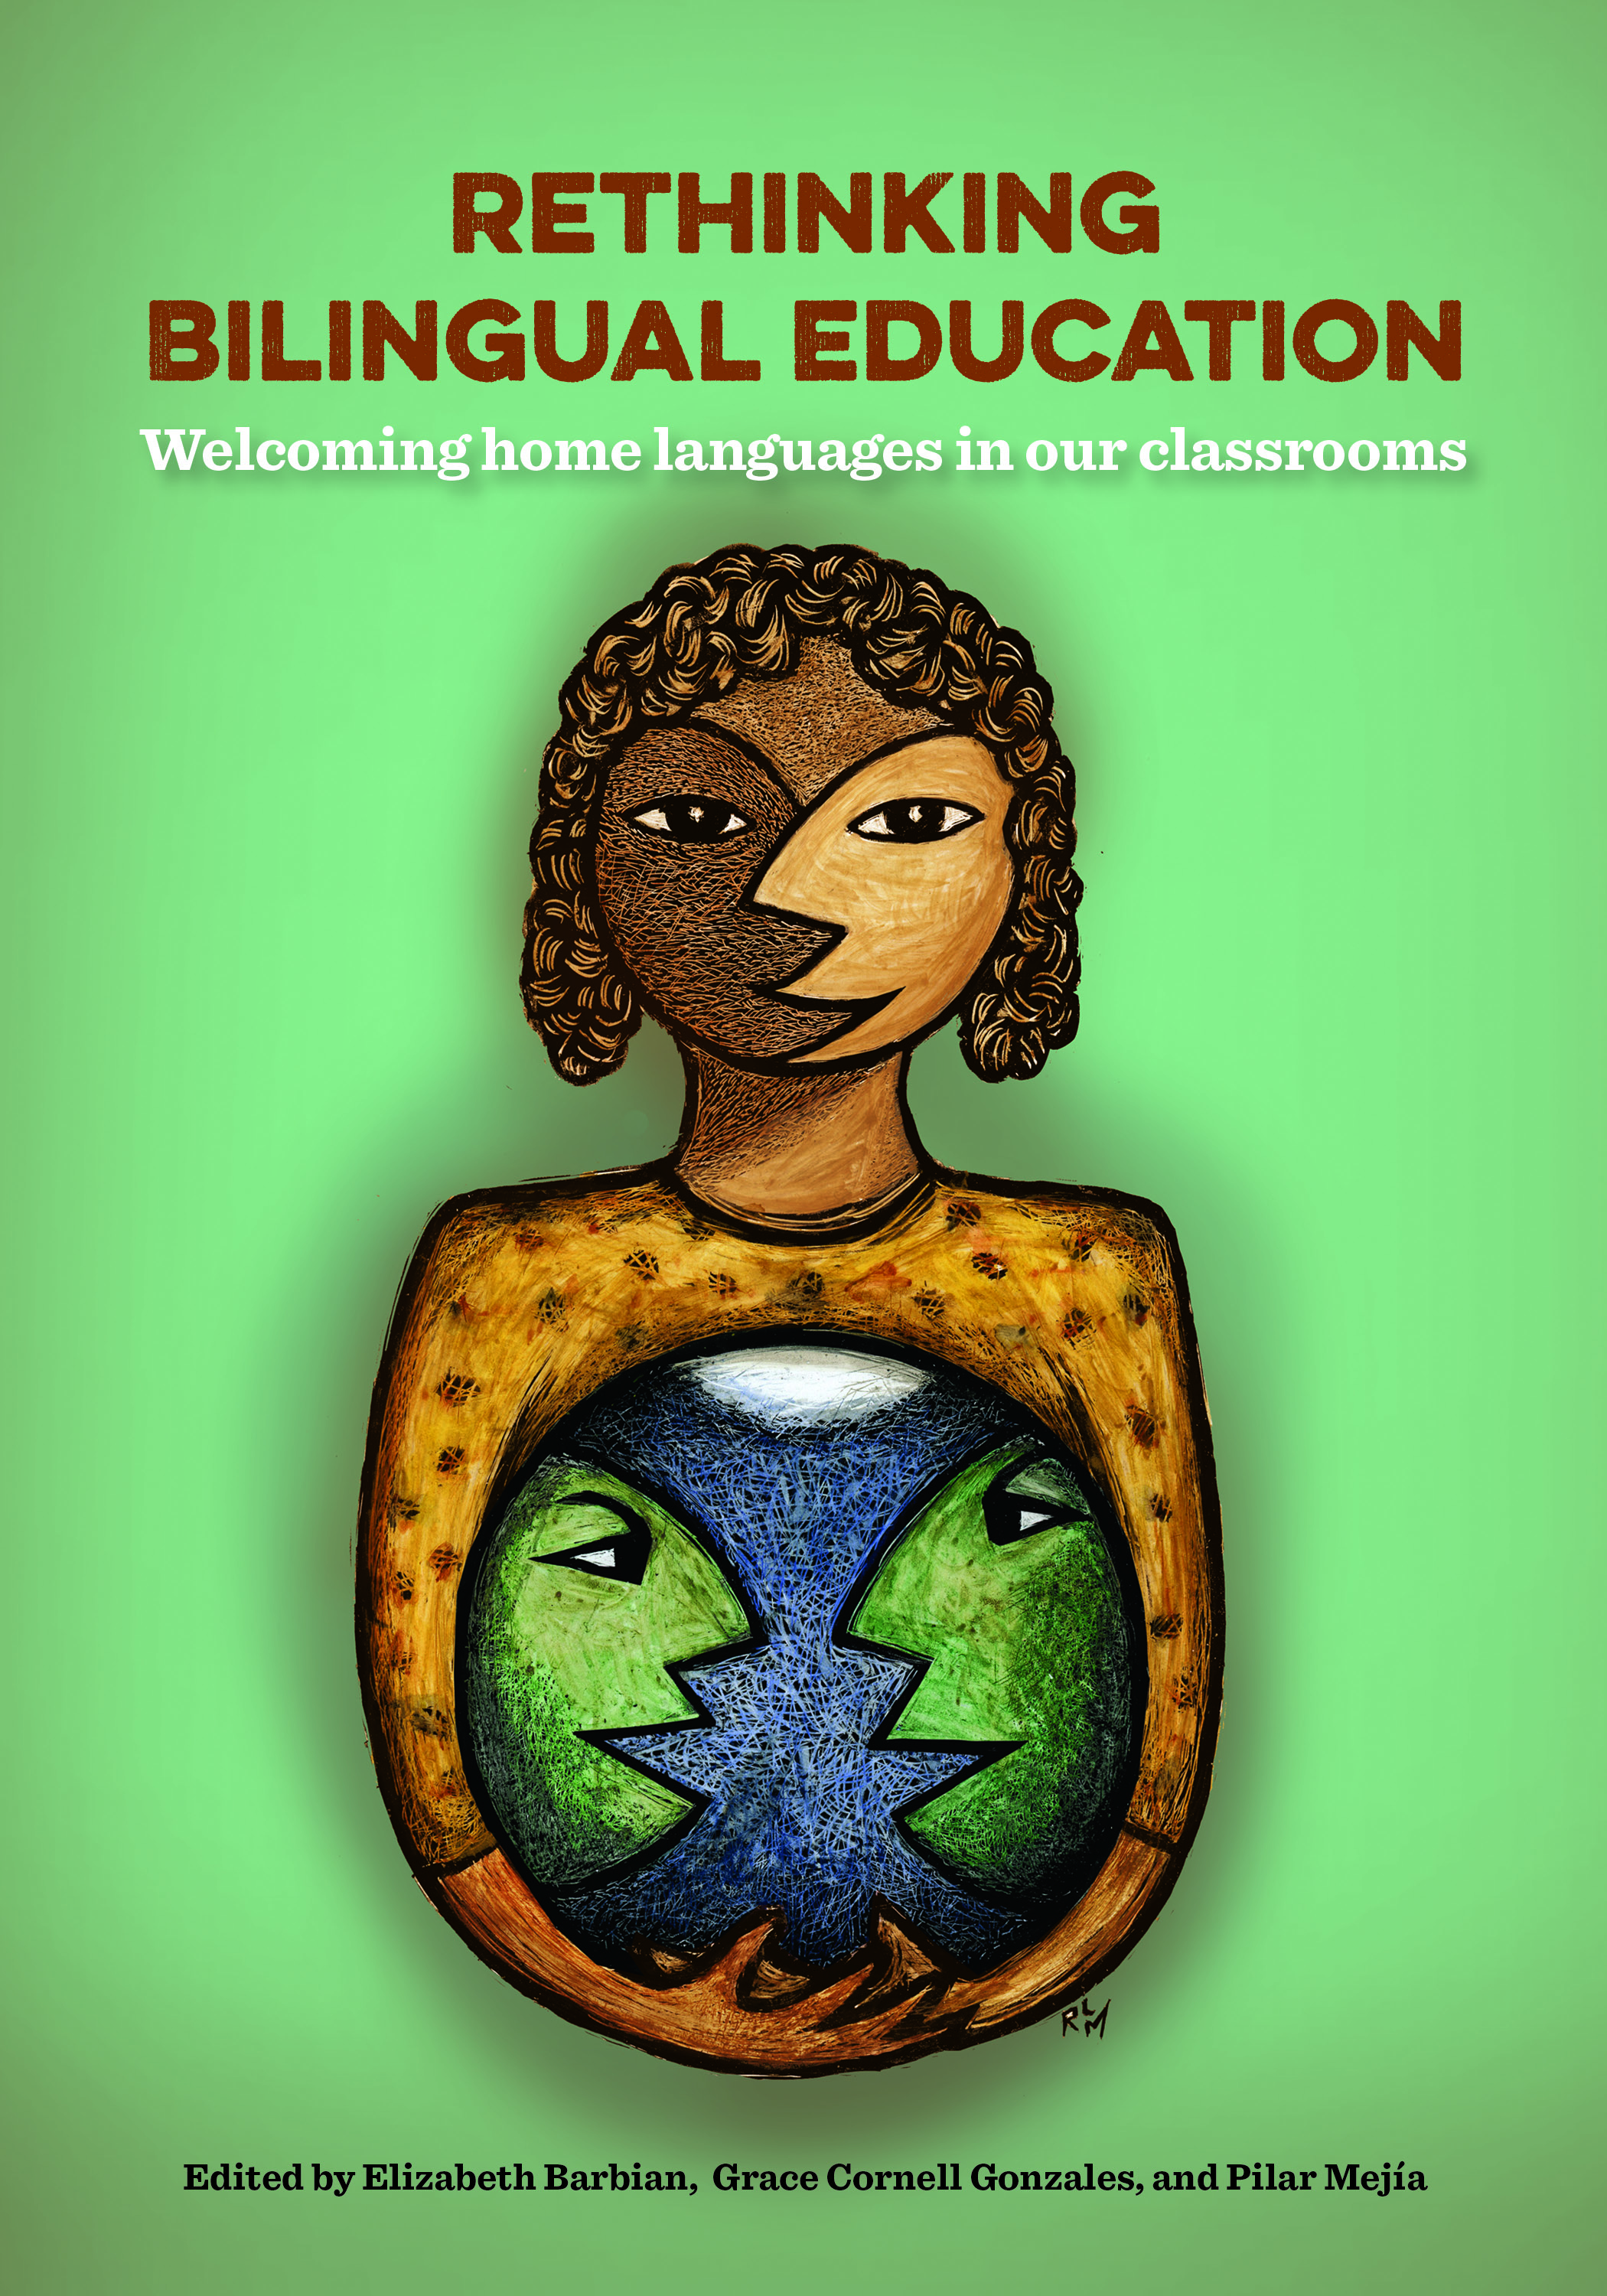 Rethinking Bilingual Education (Book Cover) | Zinn Education Project